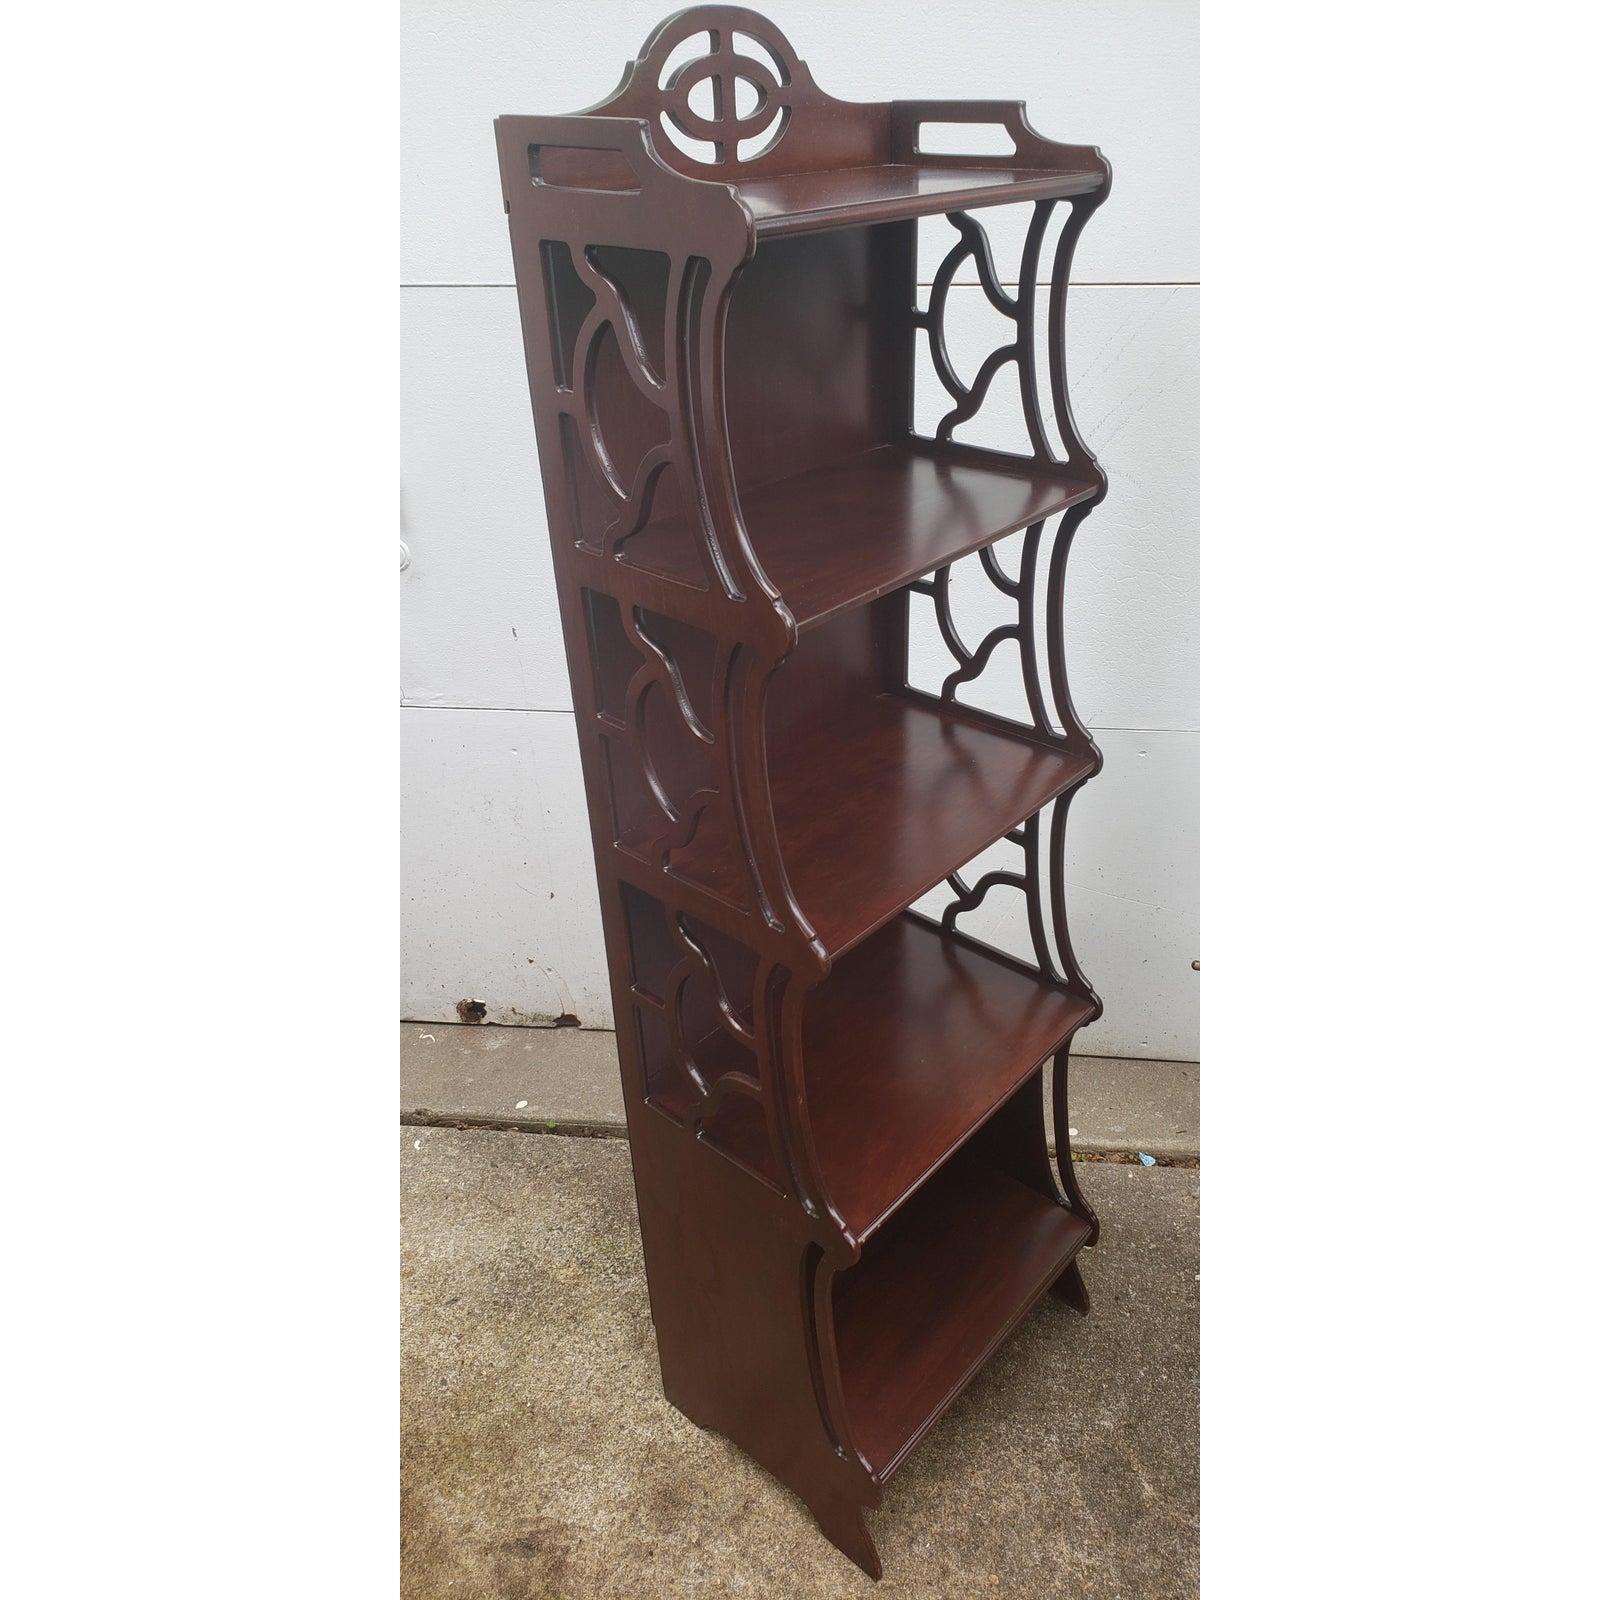 Very rare Lewis Butler mixture of neoclassical and chippendale style display shelf etagere. Great for any room and decor in your home. In great condition. Just the right size to fit anywhere. 
It measures 16W x 12.25D x 52.5H.